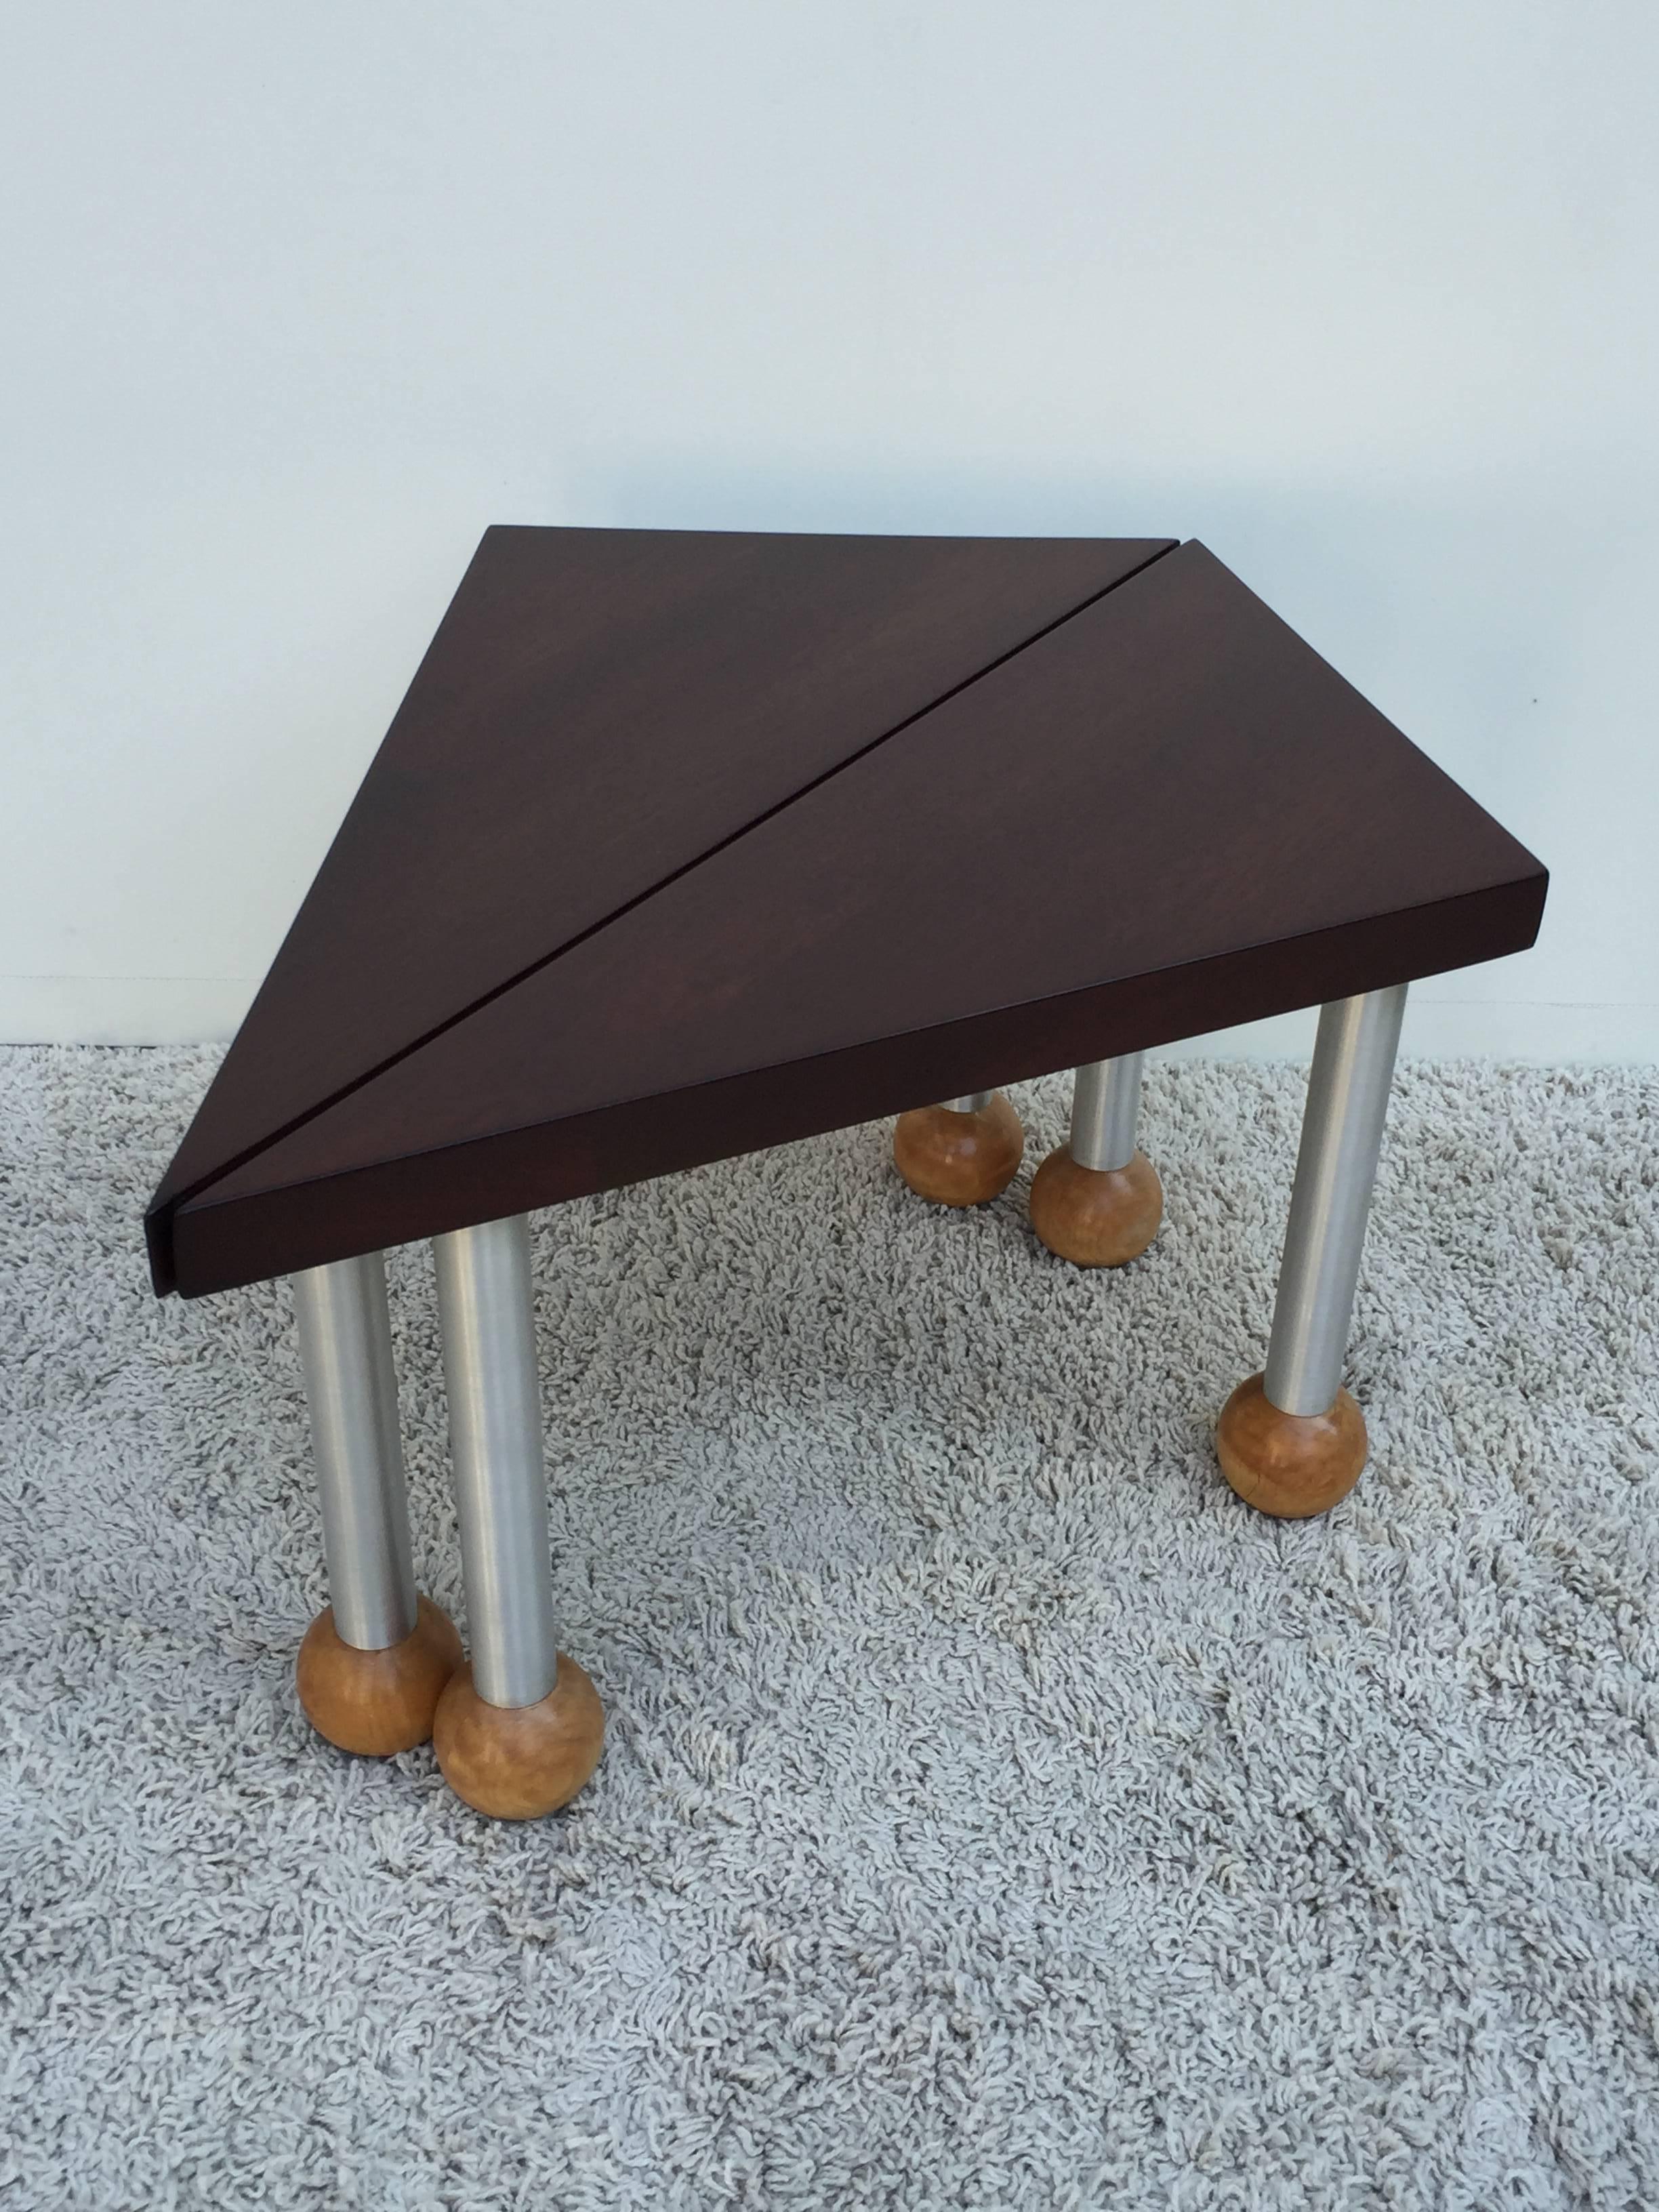 Pair of triangular shaped walnut tables, with locks to attach as one table or individual side tables, brushed aluminum legs and blonde mahogany ball feet in the style of Russel Wright. Unsigned.

Each table measures 29.50 deep 12